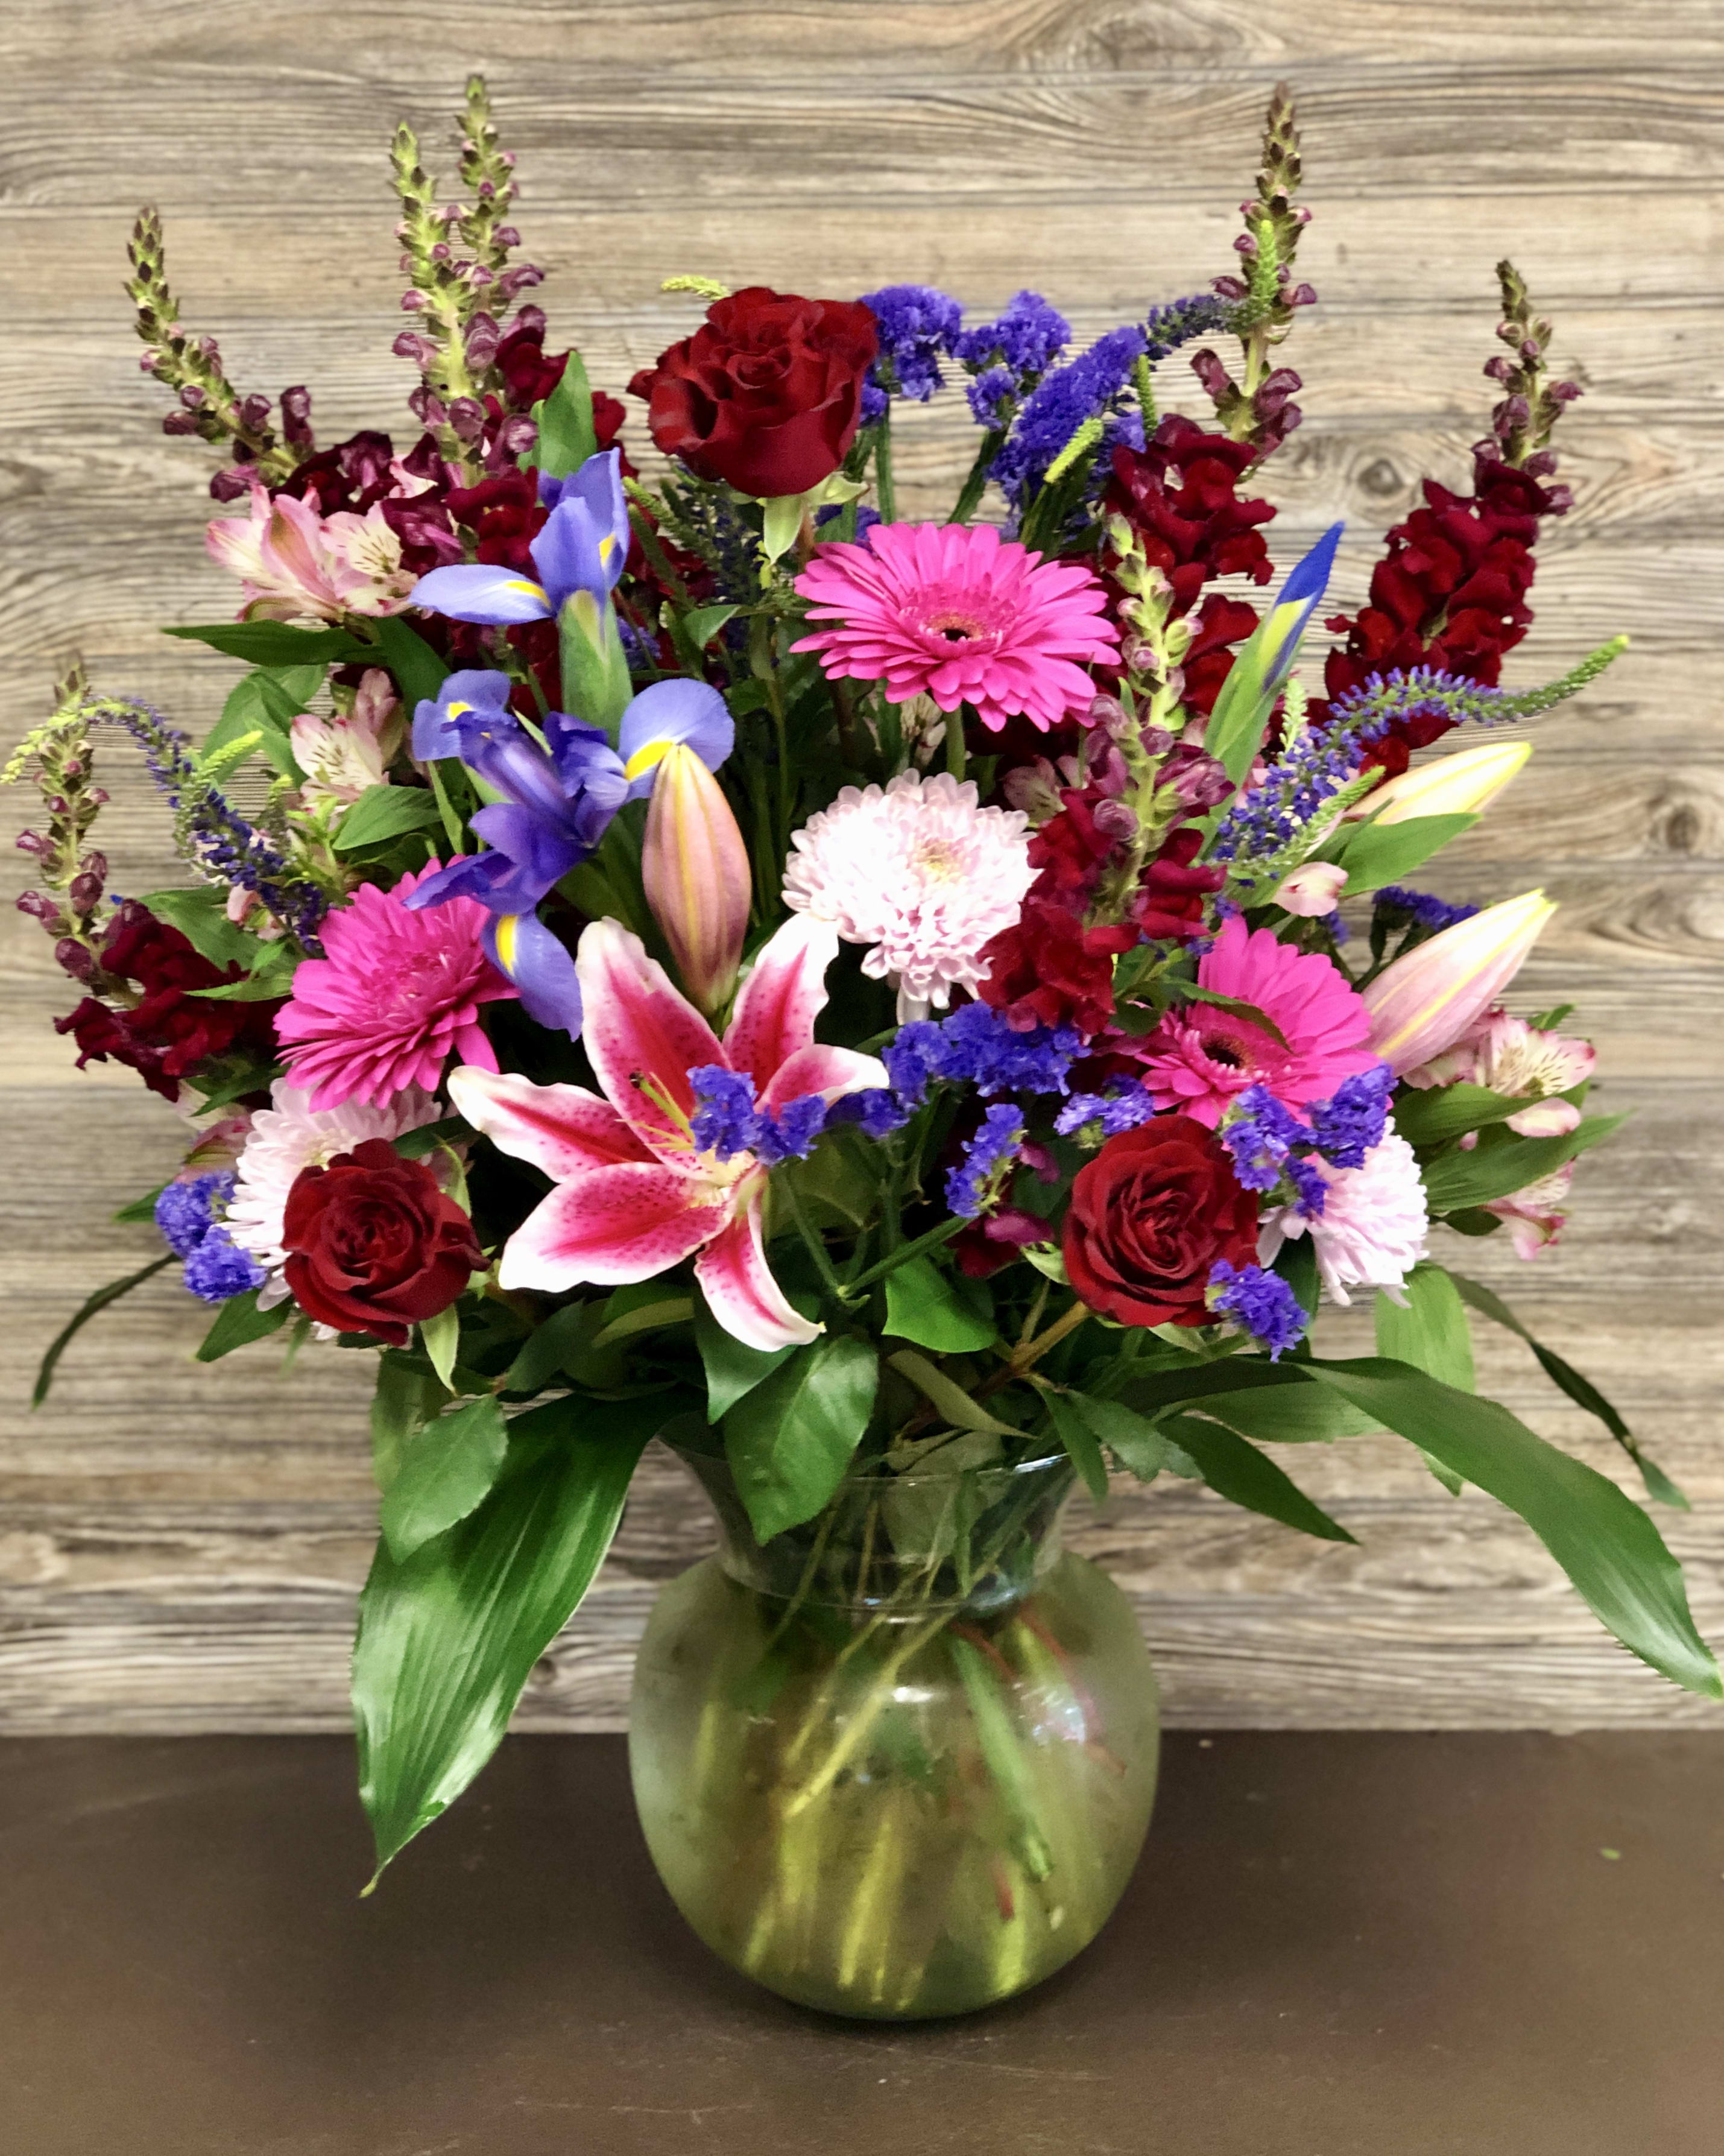 Vibrant Garden Mix  - Assorted mixed seasonal flowers like lilies, roses, gerberas, iris, and snapdragons accented with fillers and greenery in a clear rounded Optic vase (Dimensions of the container are 9.75inHx 7.25inW) Arrangement is about 24hx14w.